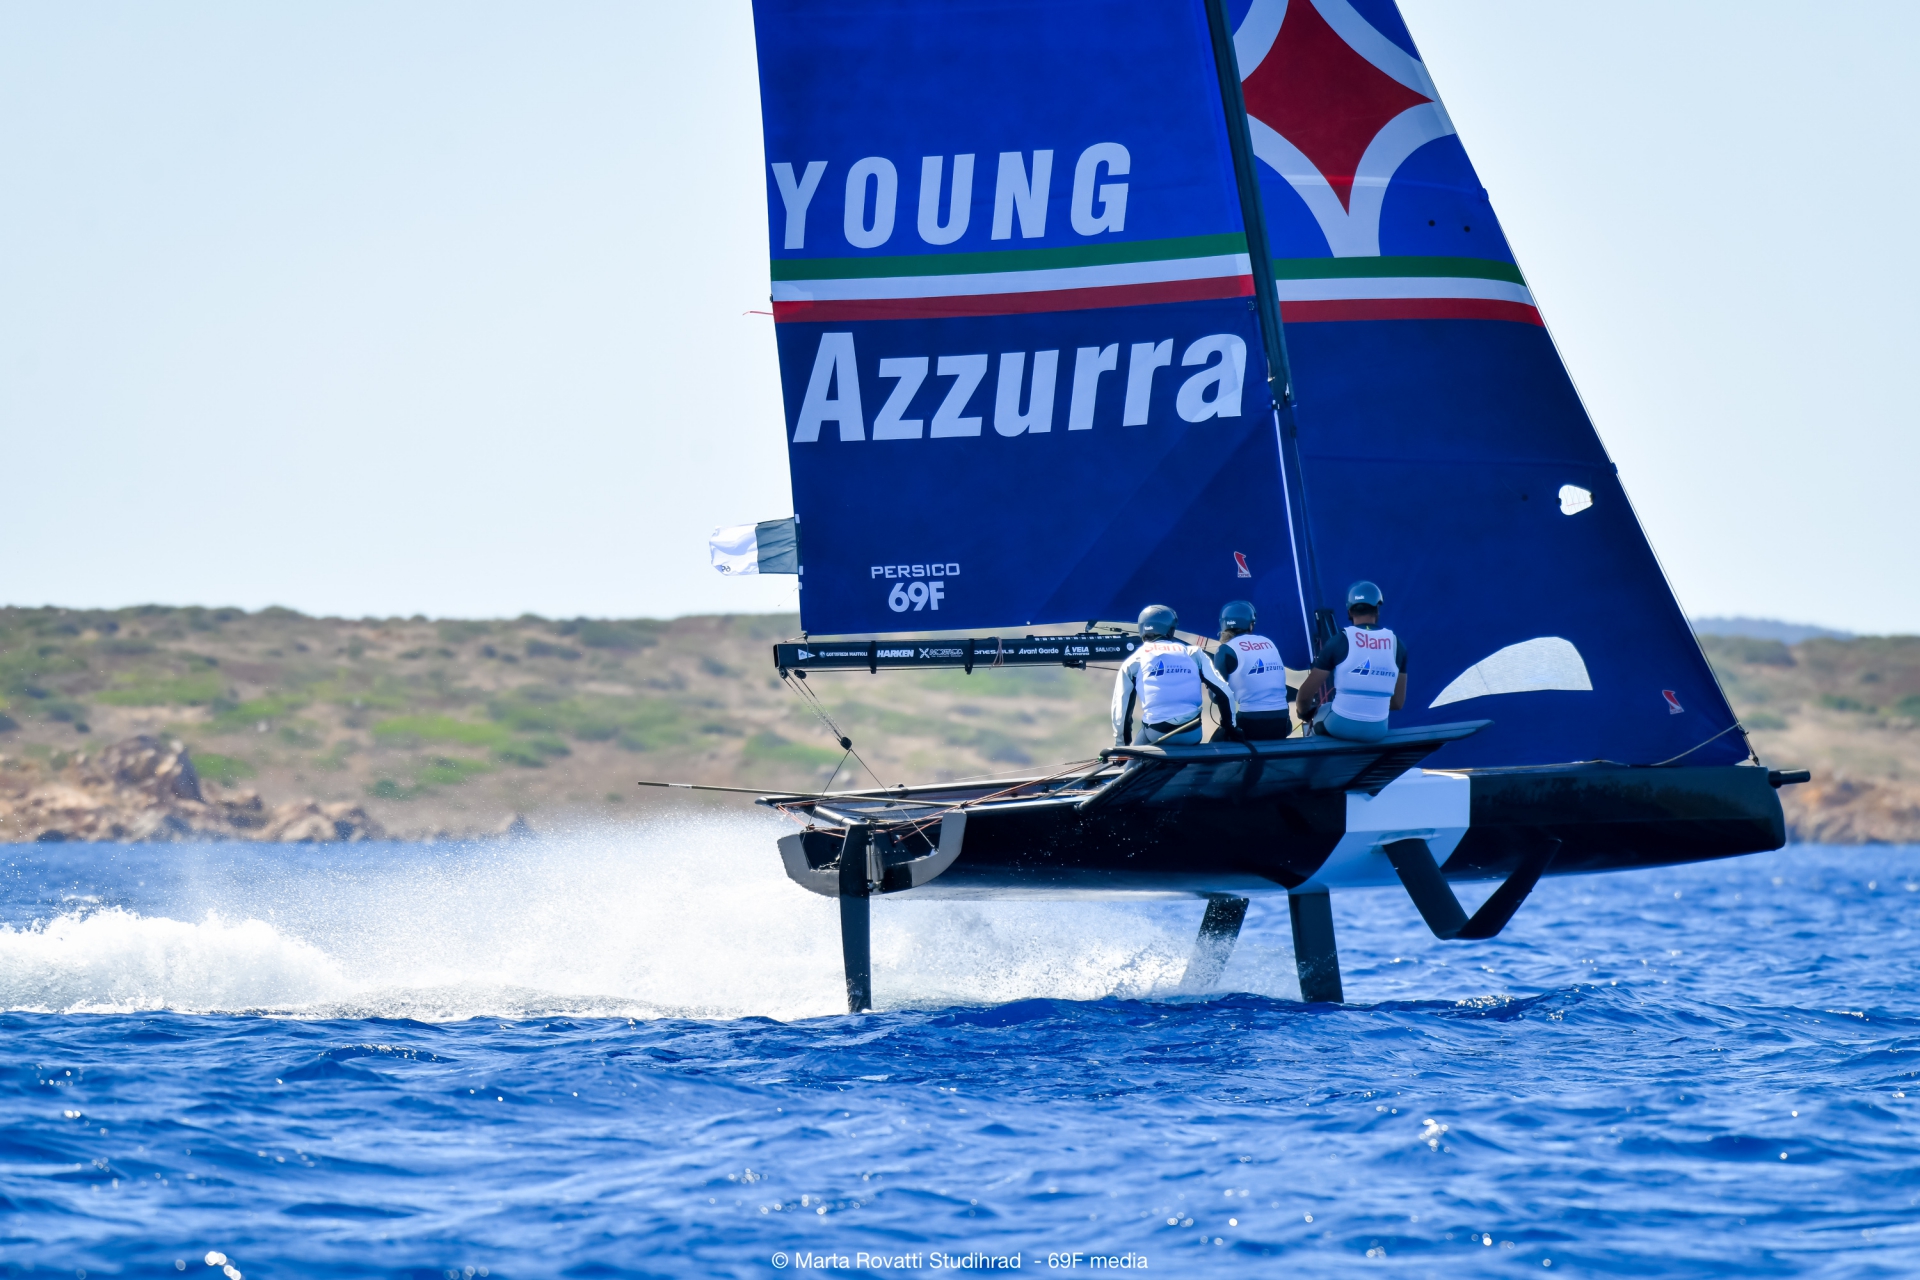 Young Azzurra project draws to a close with the Grand Final of the Youth Foiling Gold Cup - News - Yacht Club Costa Smeralda